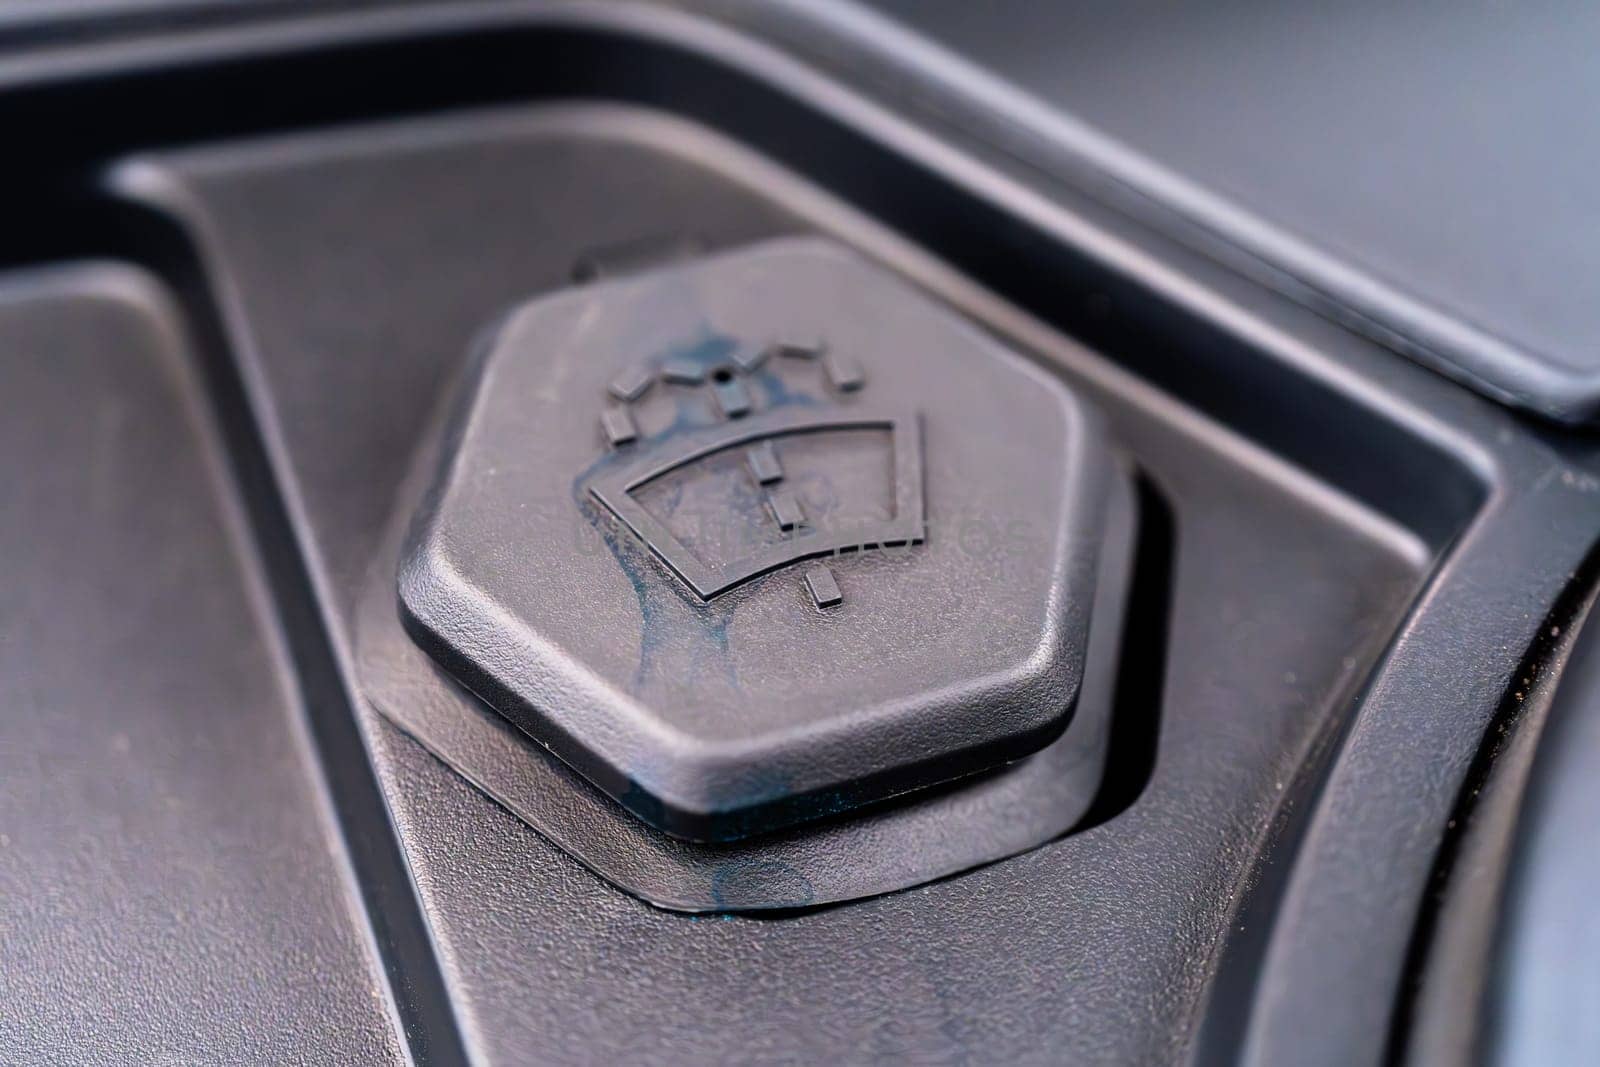 Denver, Colorado, USA-May 5, 2024-This image shows a detailed close-up of the windshield washer fluid cap in a Tesla Cybertruck, highlighting the unique design and branding elements typical of Tesla innovative approach to car manufacturing.